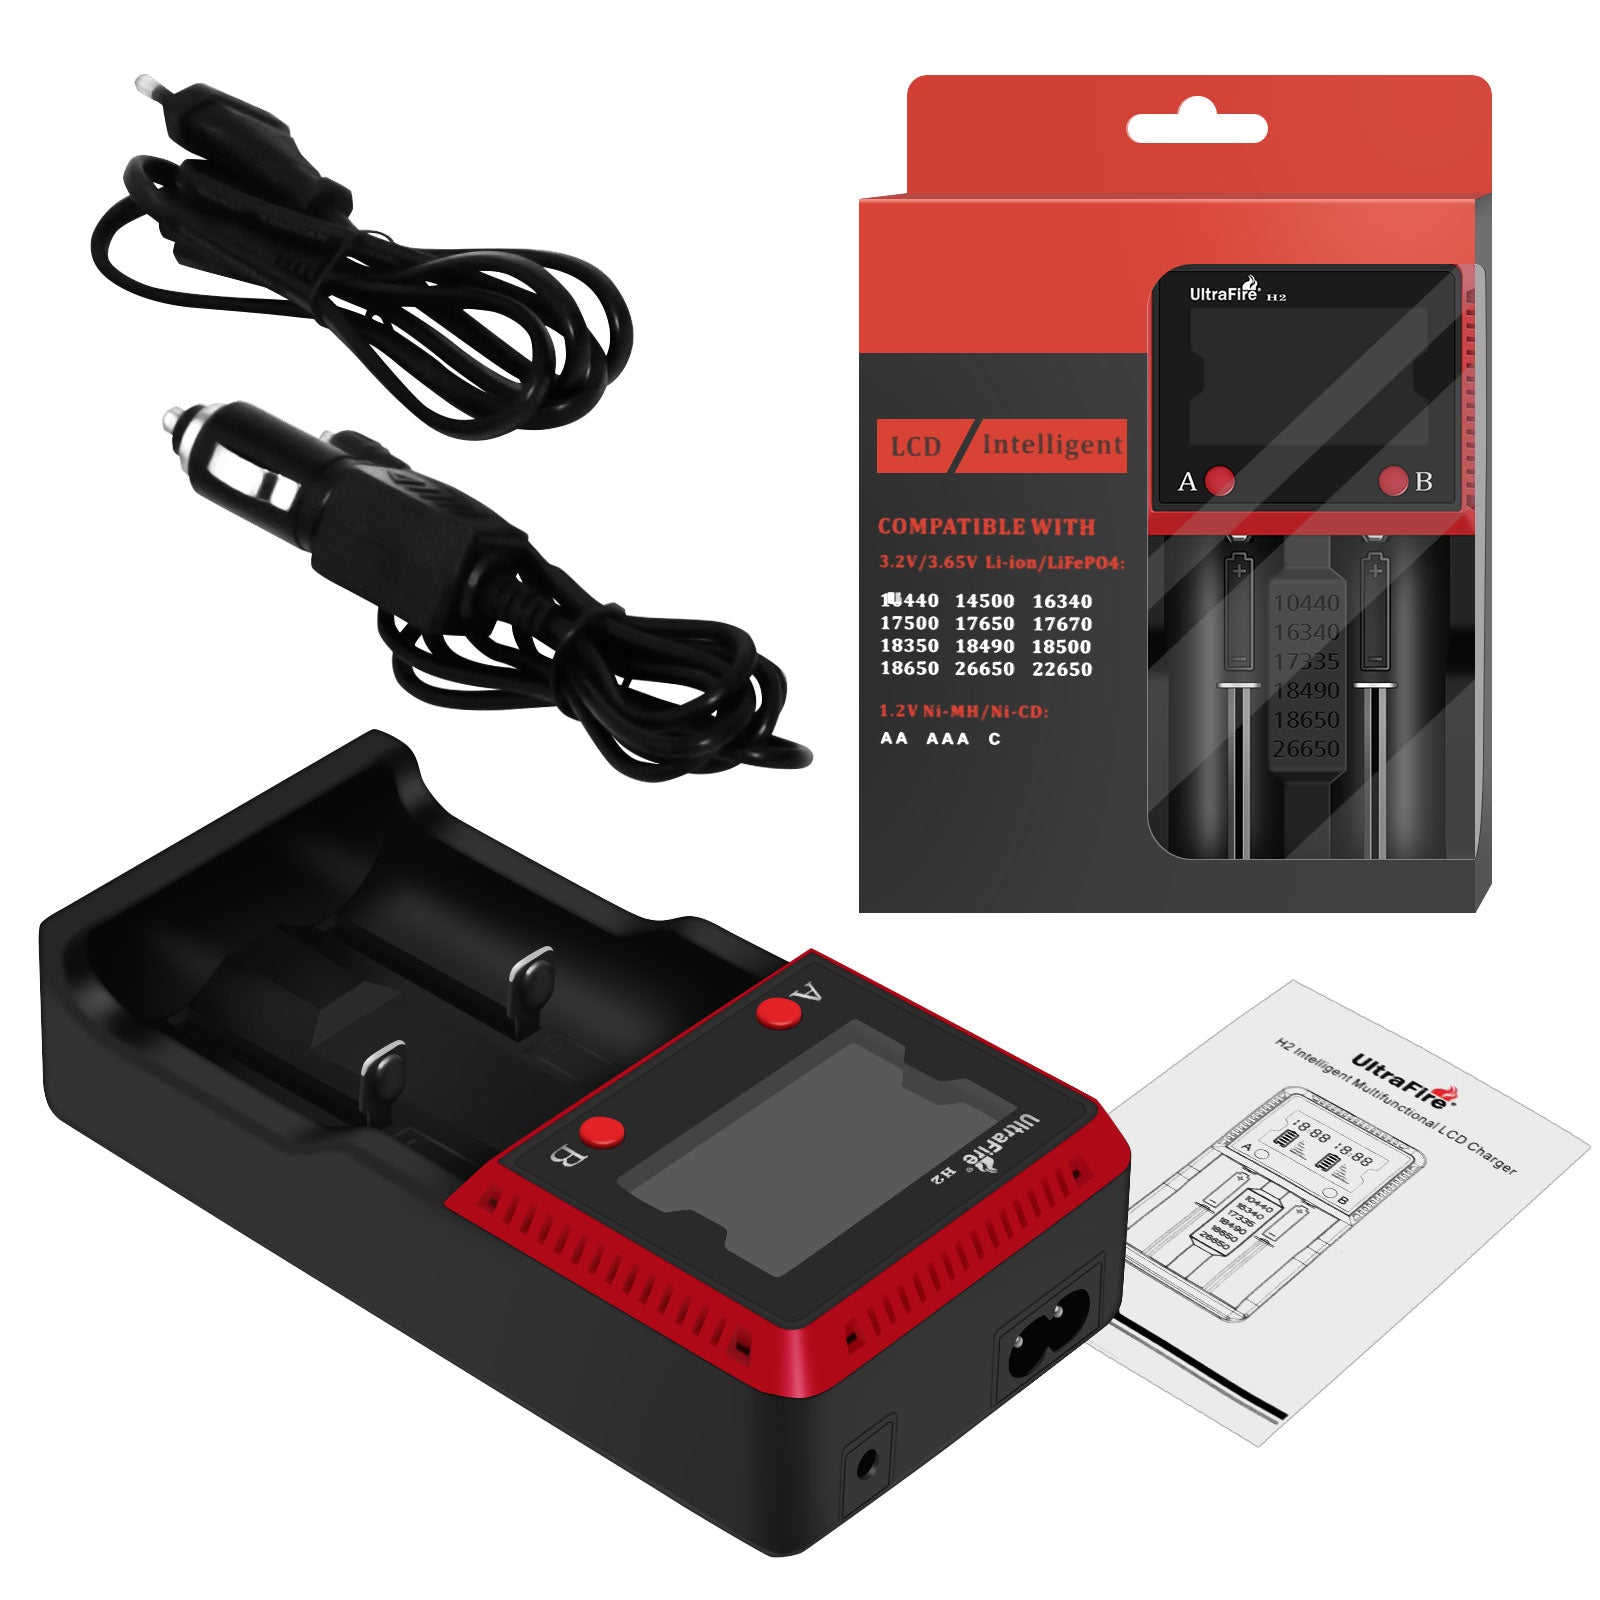 UltraFire Universal Multifunction Battery Charger DX-1